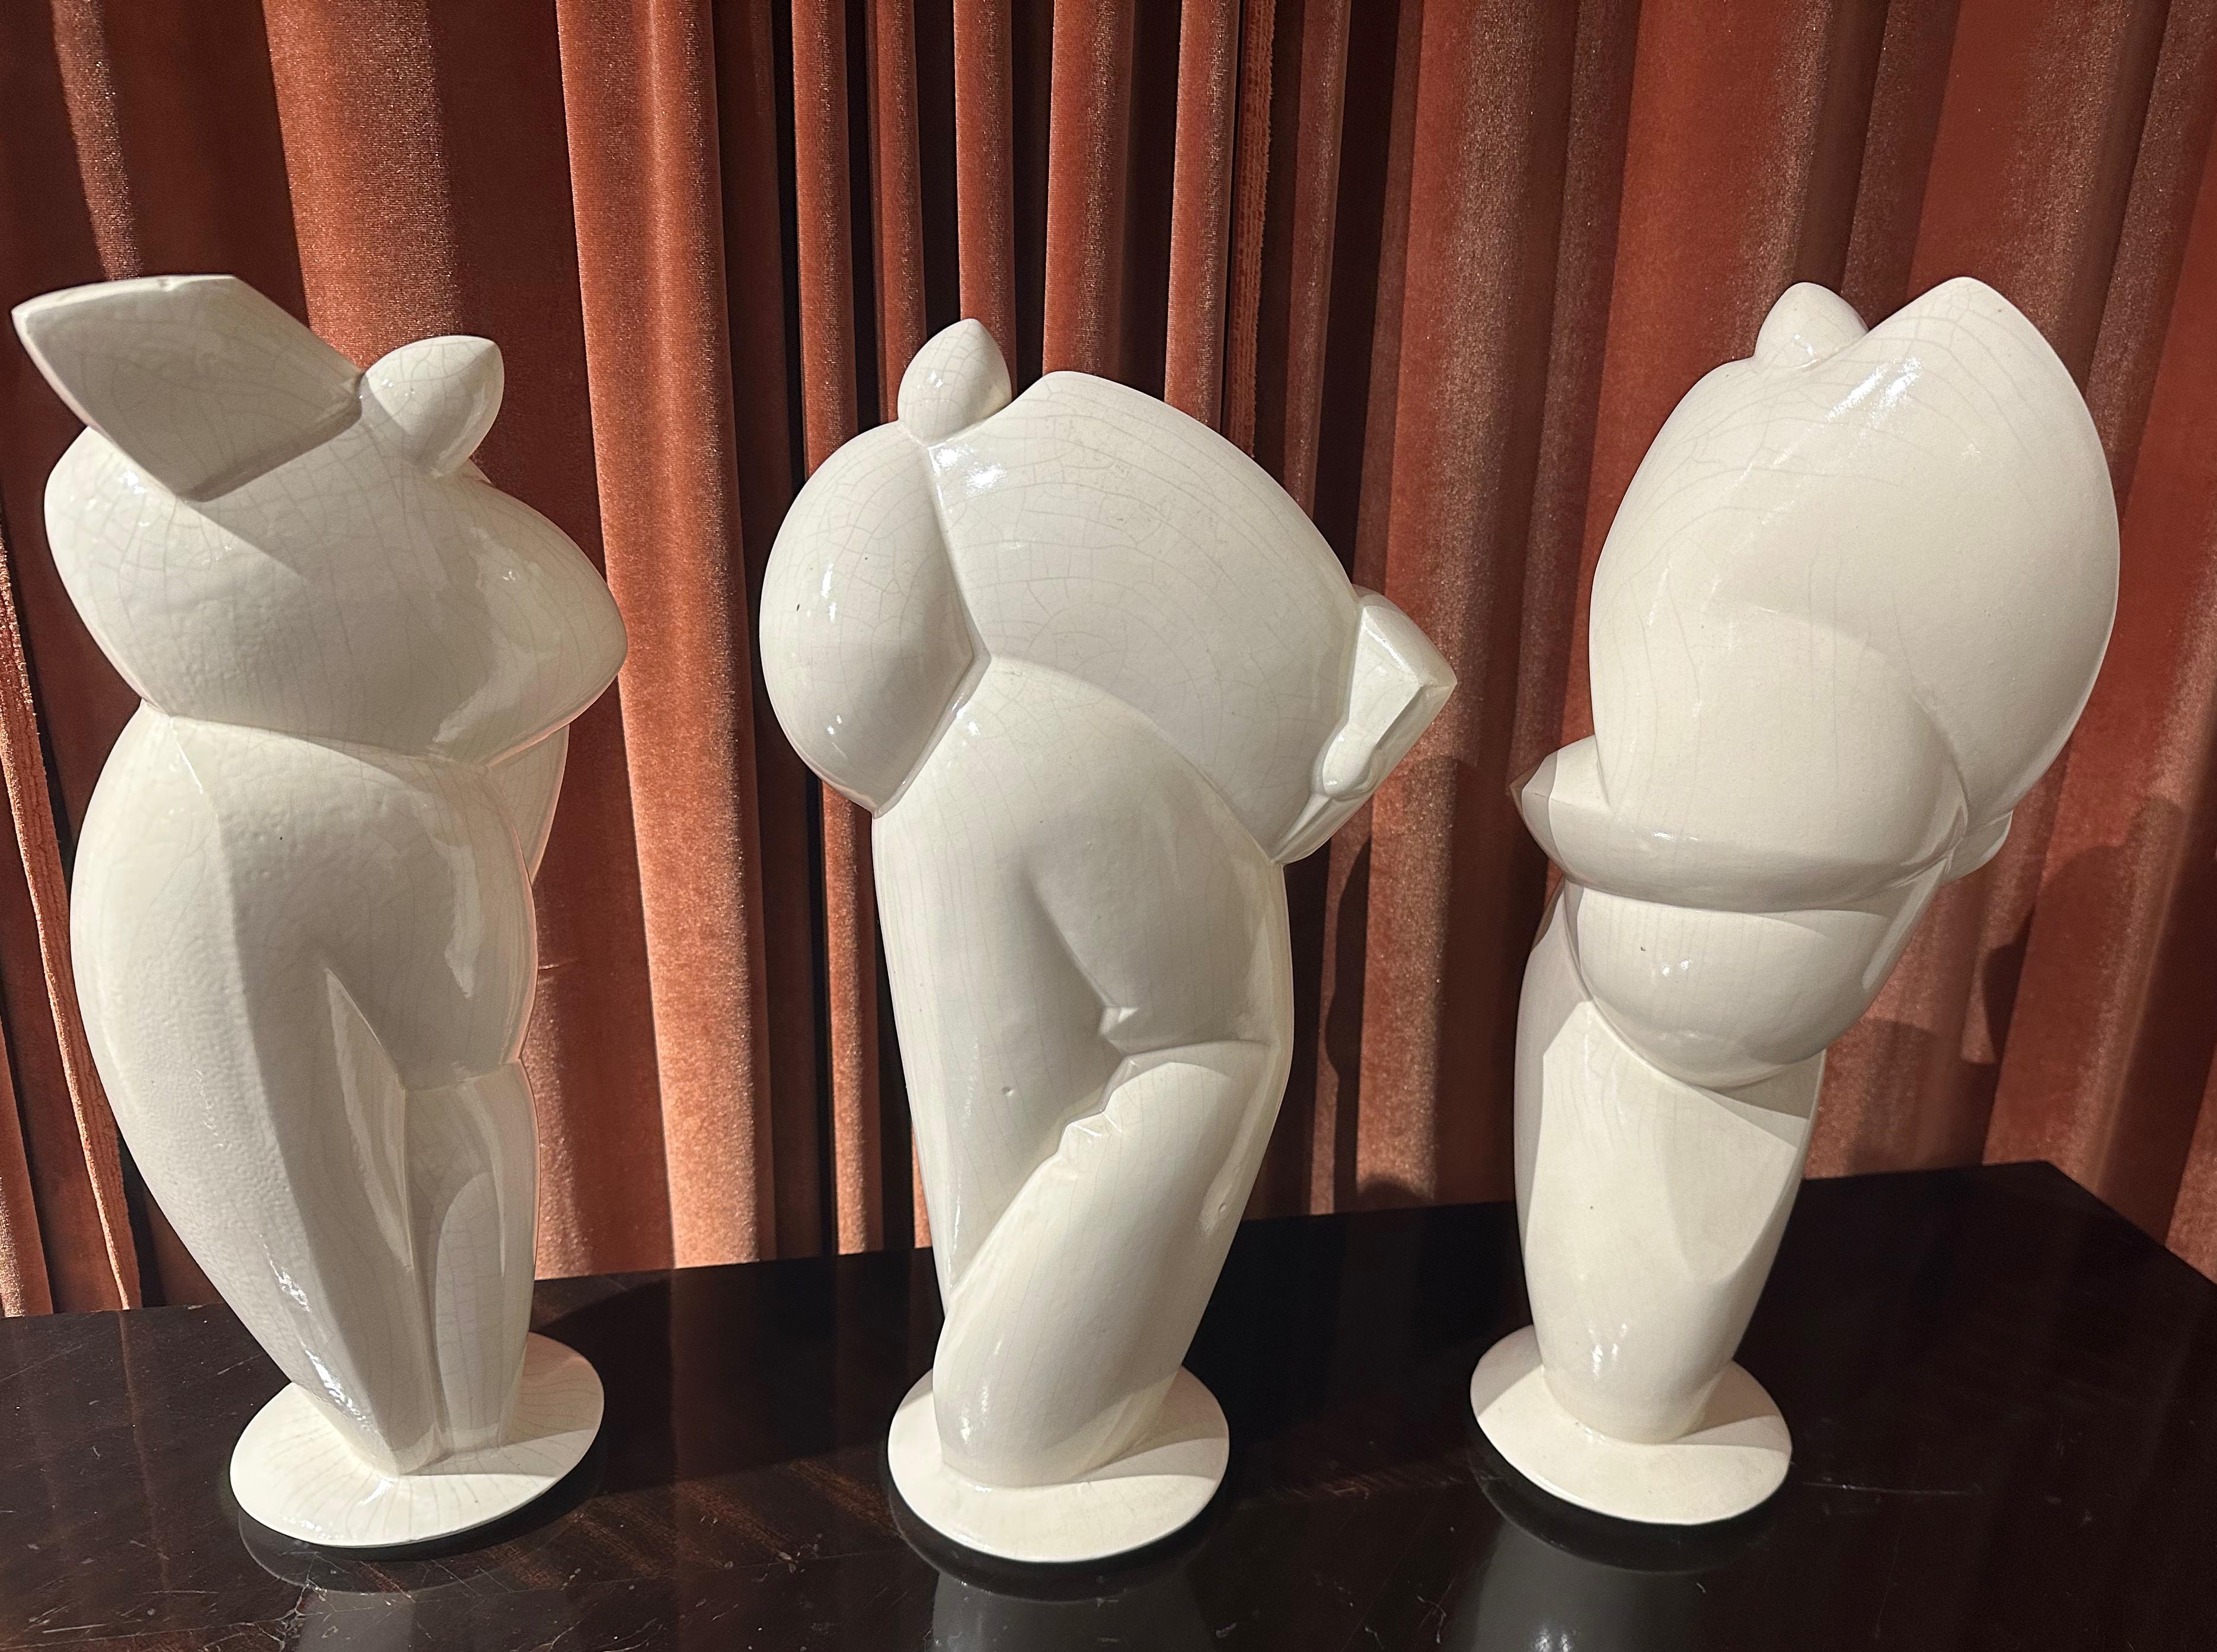 3 Cubist Art Deco Style Musicians Large Ceramic Sculptures In Good Condition For Sale In Oakland, CA